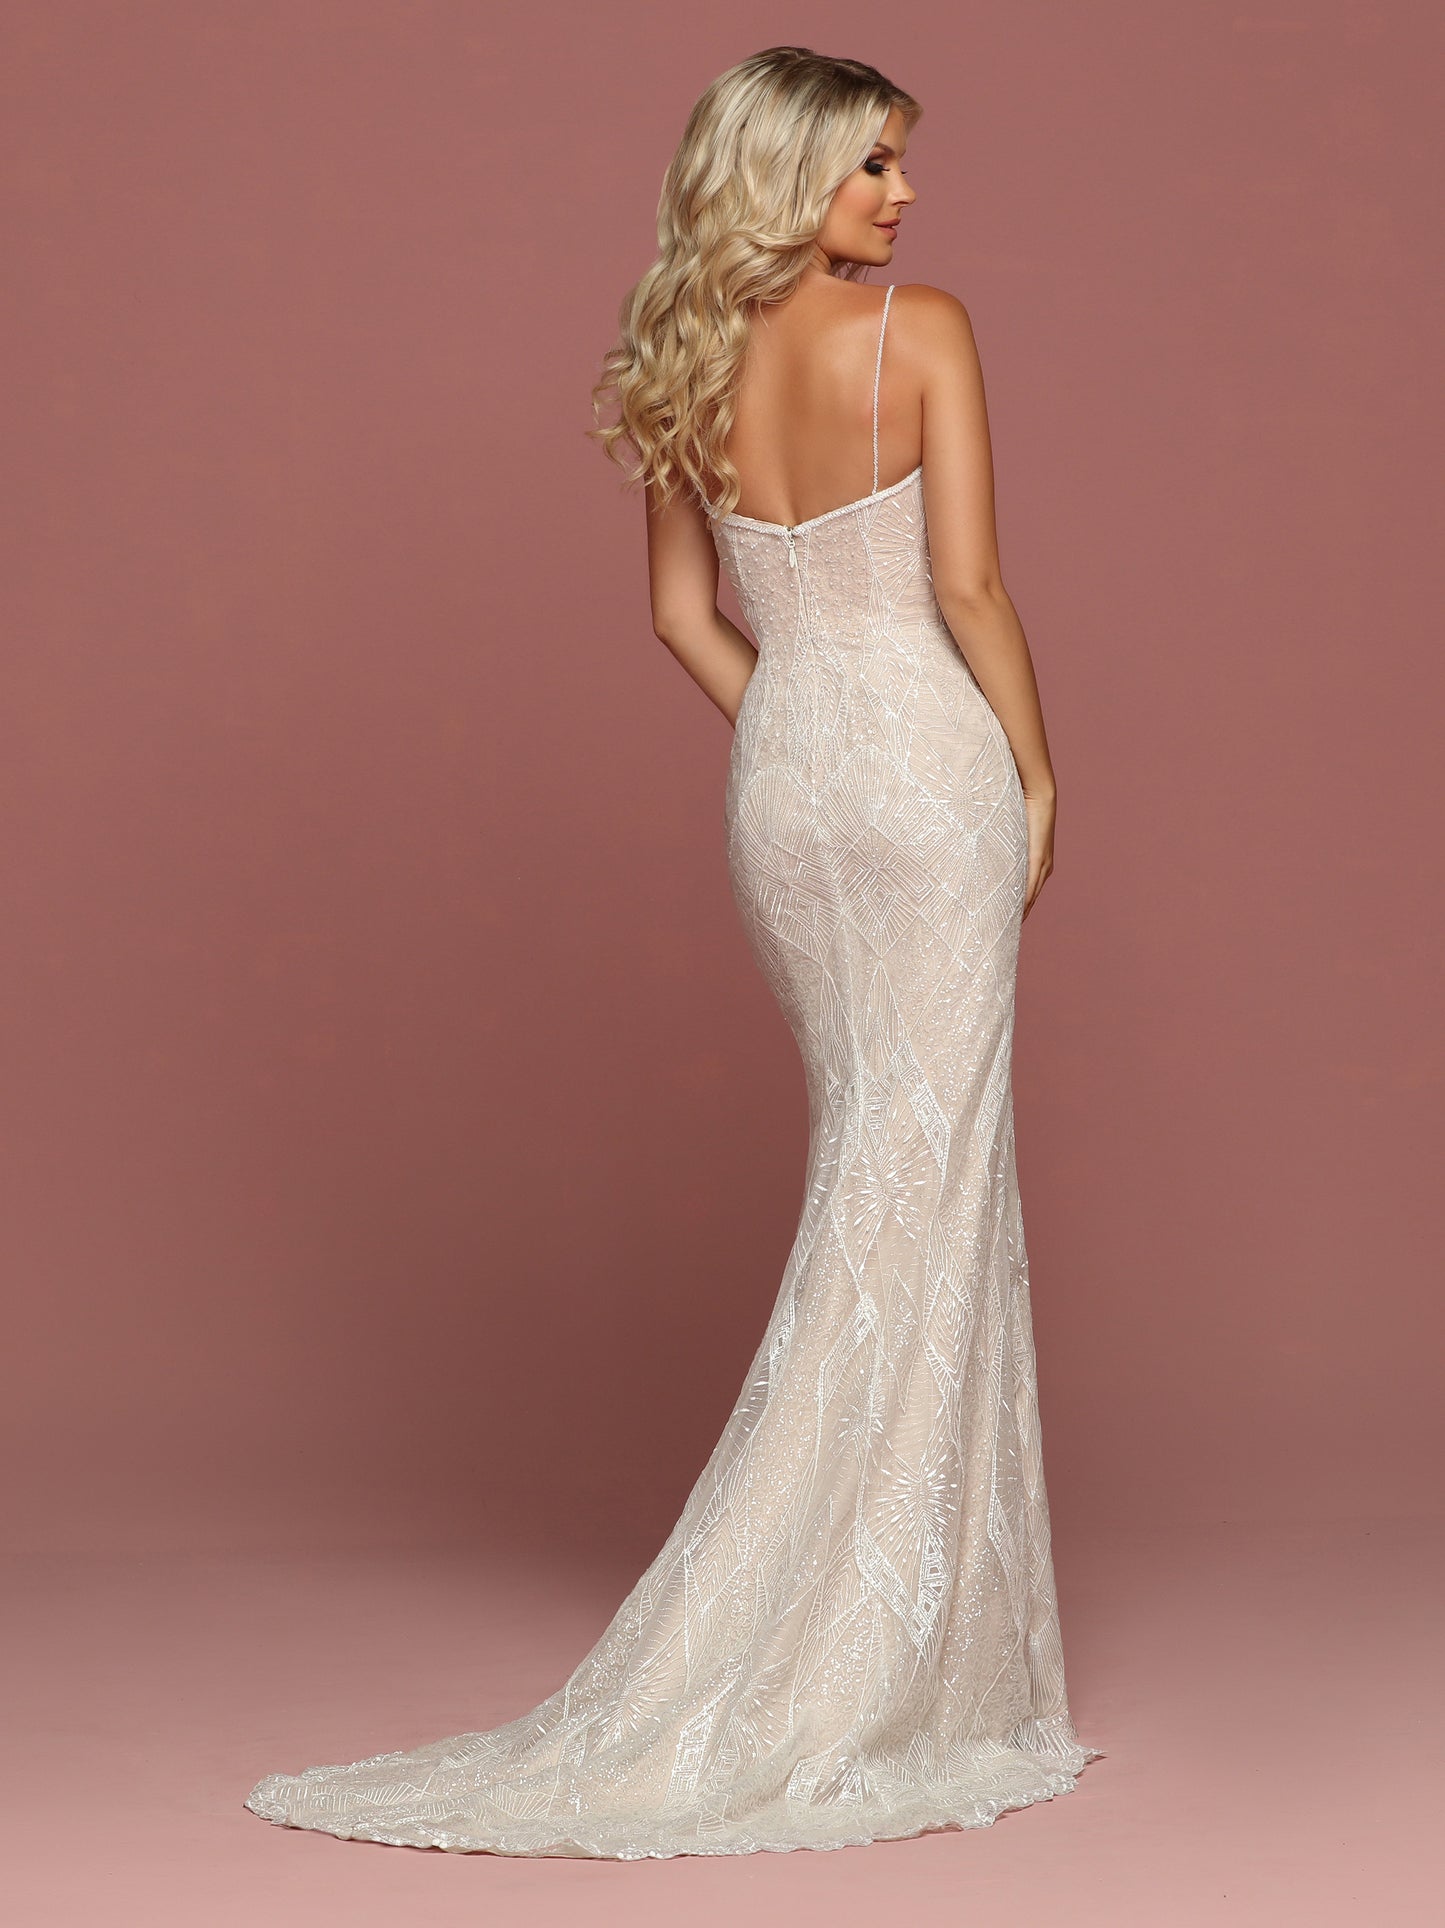 Davinci Bridal 50480 is a Fitted Hand Embellished Wedding Dress. Featuring a sweetheart neckline with Embellished Spaghetti Straps. Eyelash Lace Edge along the hem and train.  Available for 1-2 Week Delivery!!!  Available Sizes: 2,4,6,8,10,12,14,16,18,20  Available Colors: Ivory/Topaz, Ivory/Ivory